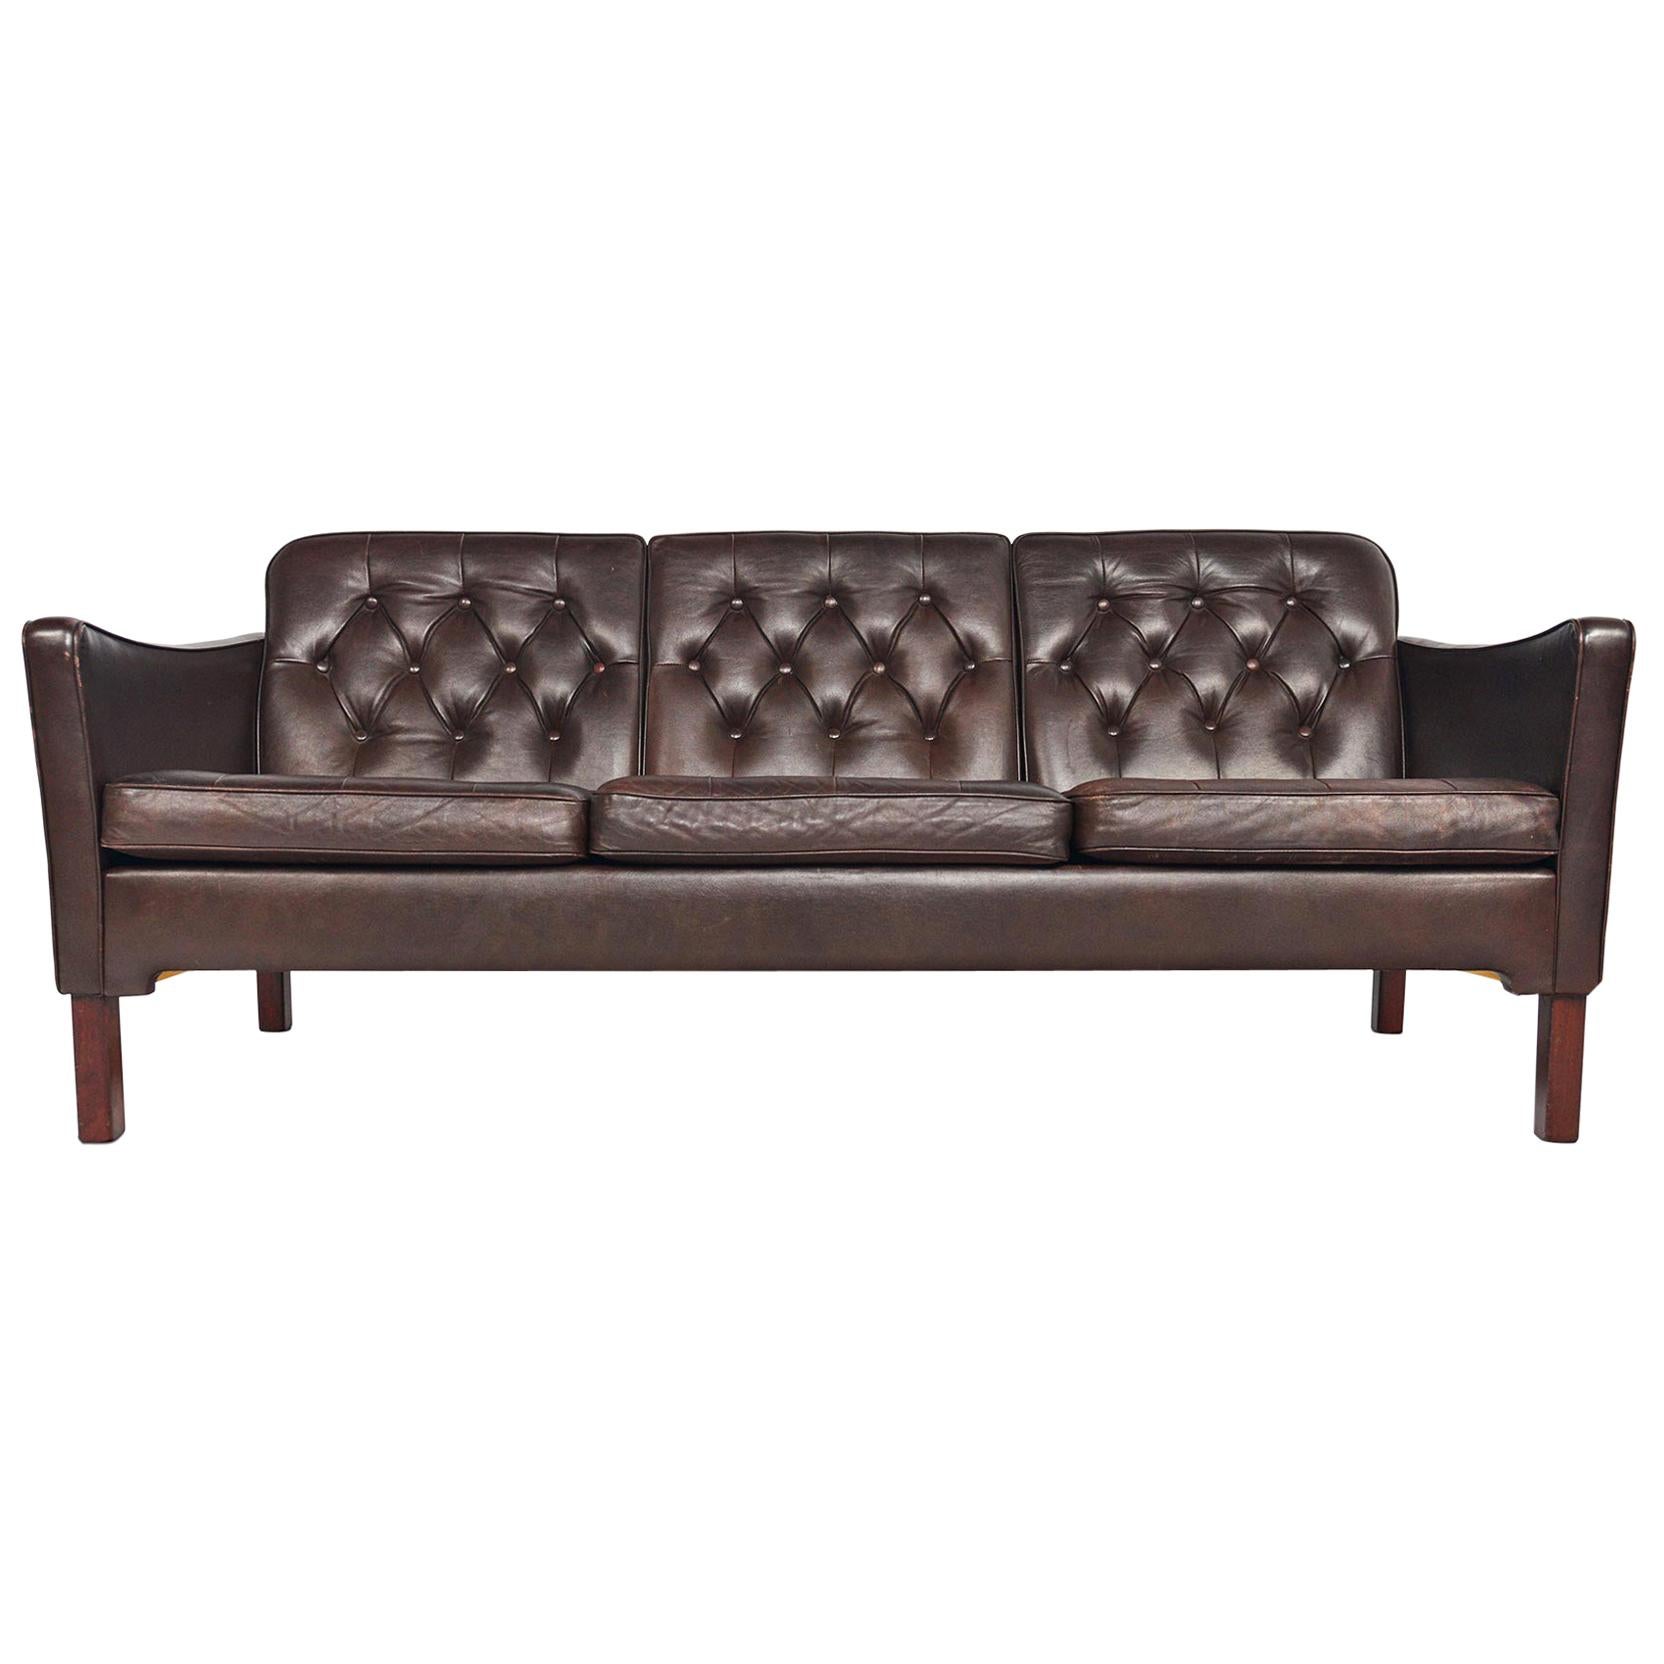 Danish Modern Brown Leather Button Tufted Sofa